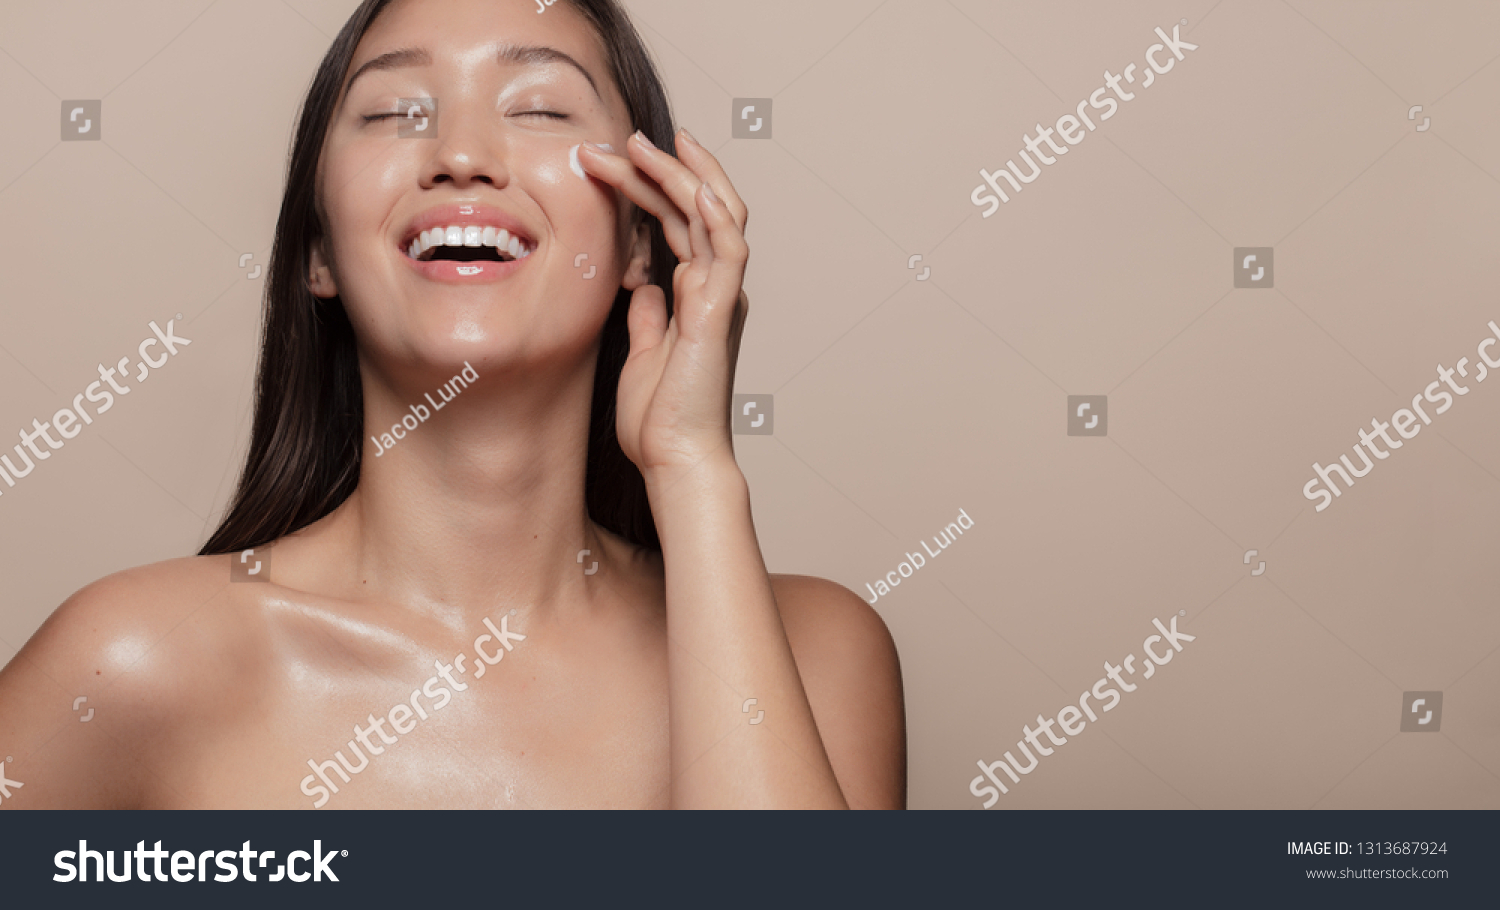 Beautiful girl with bare shoulders applying cream on her face and smiling against beige background. Smiling asian woman with glowing skin applying facial skincare cream with eyes closed.